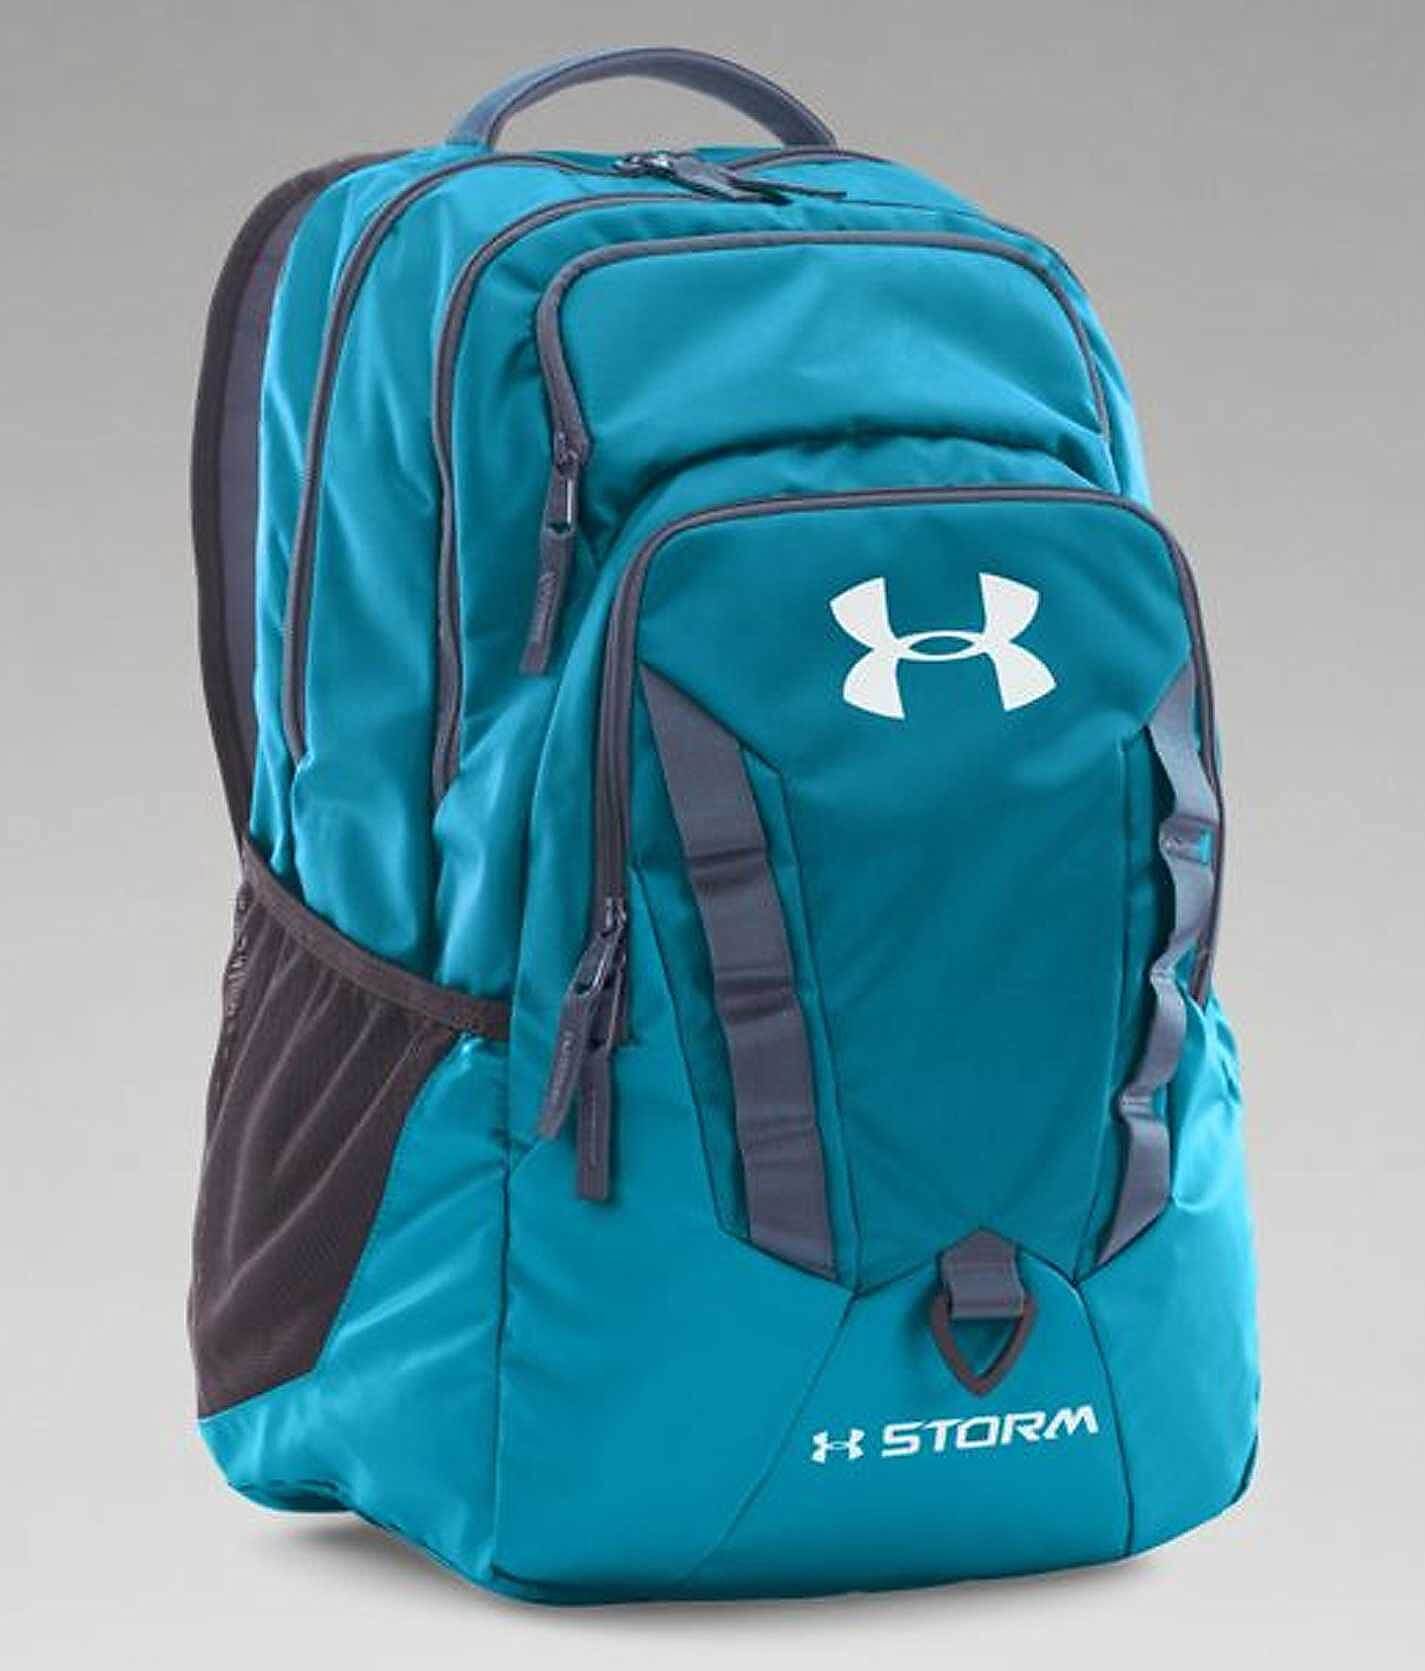 Under Armour Backpack Recruit green